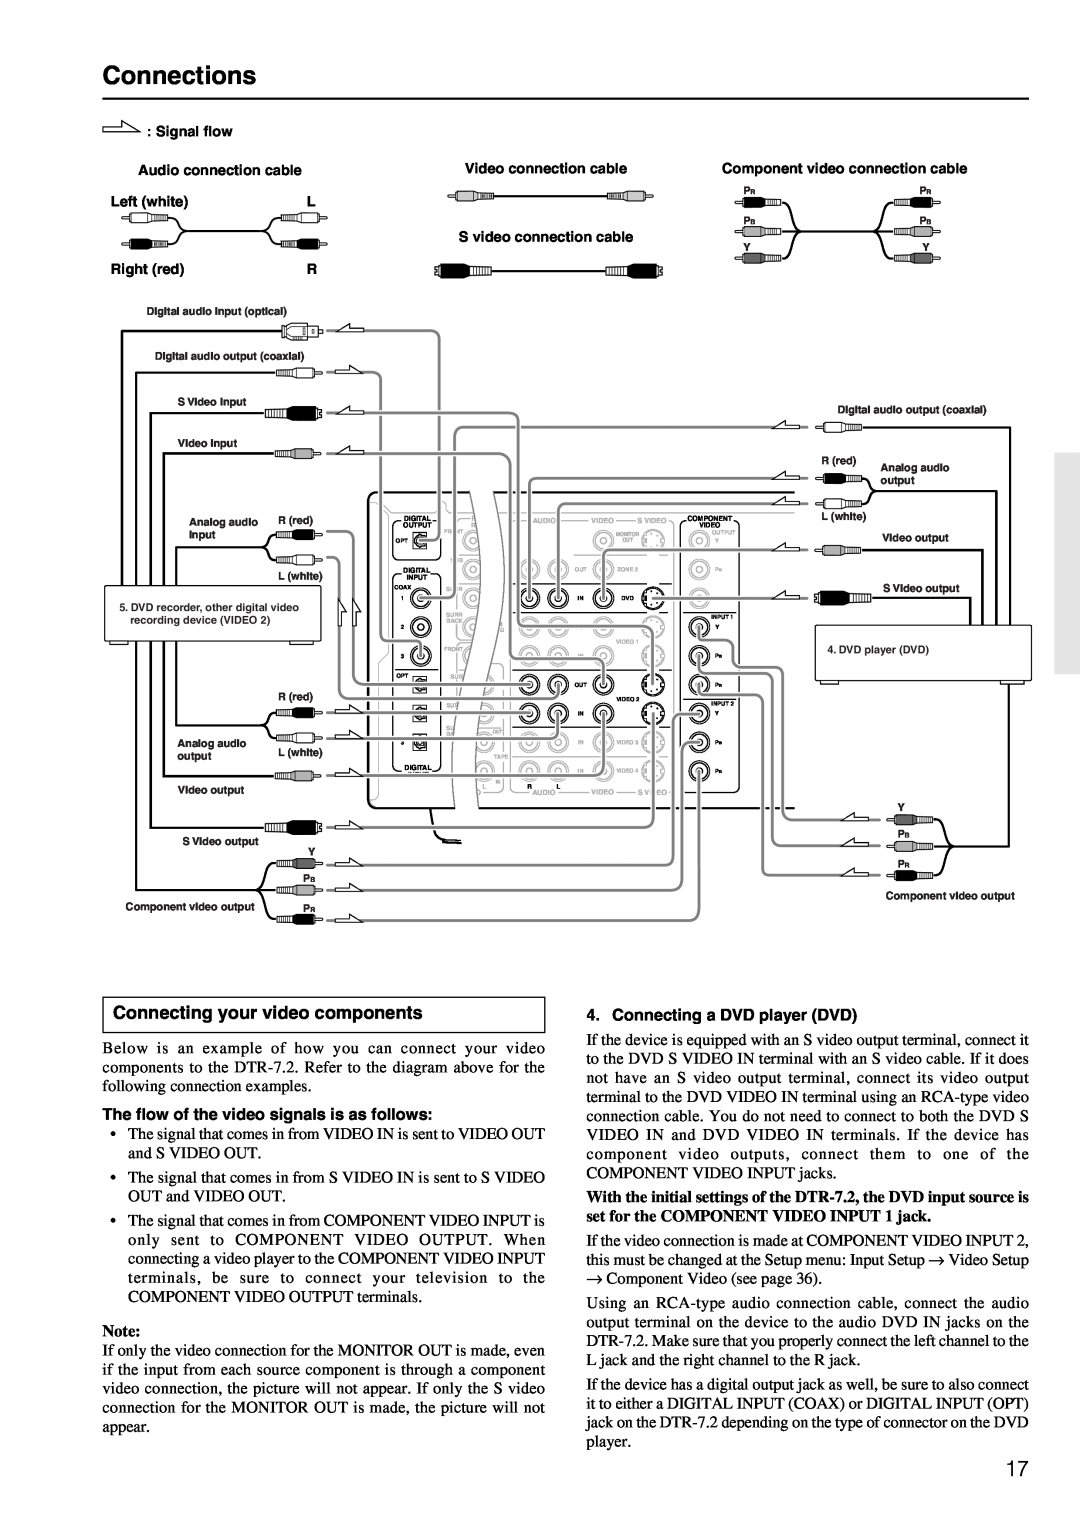 Integra DTR-7.2 instruction manual Connections, Connecting your video components 